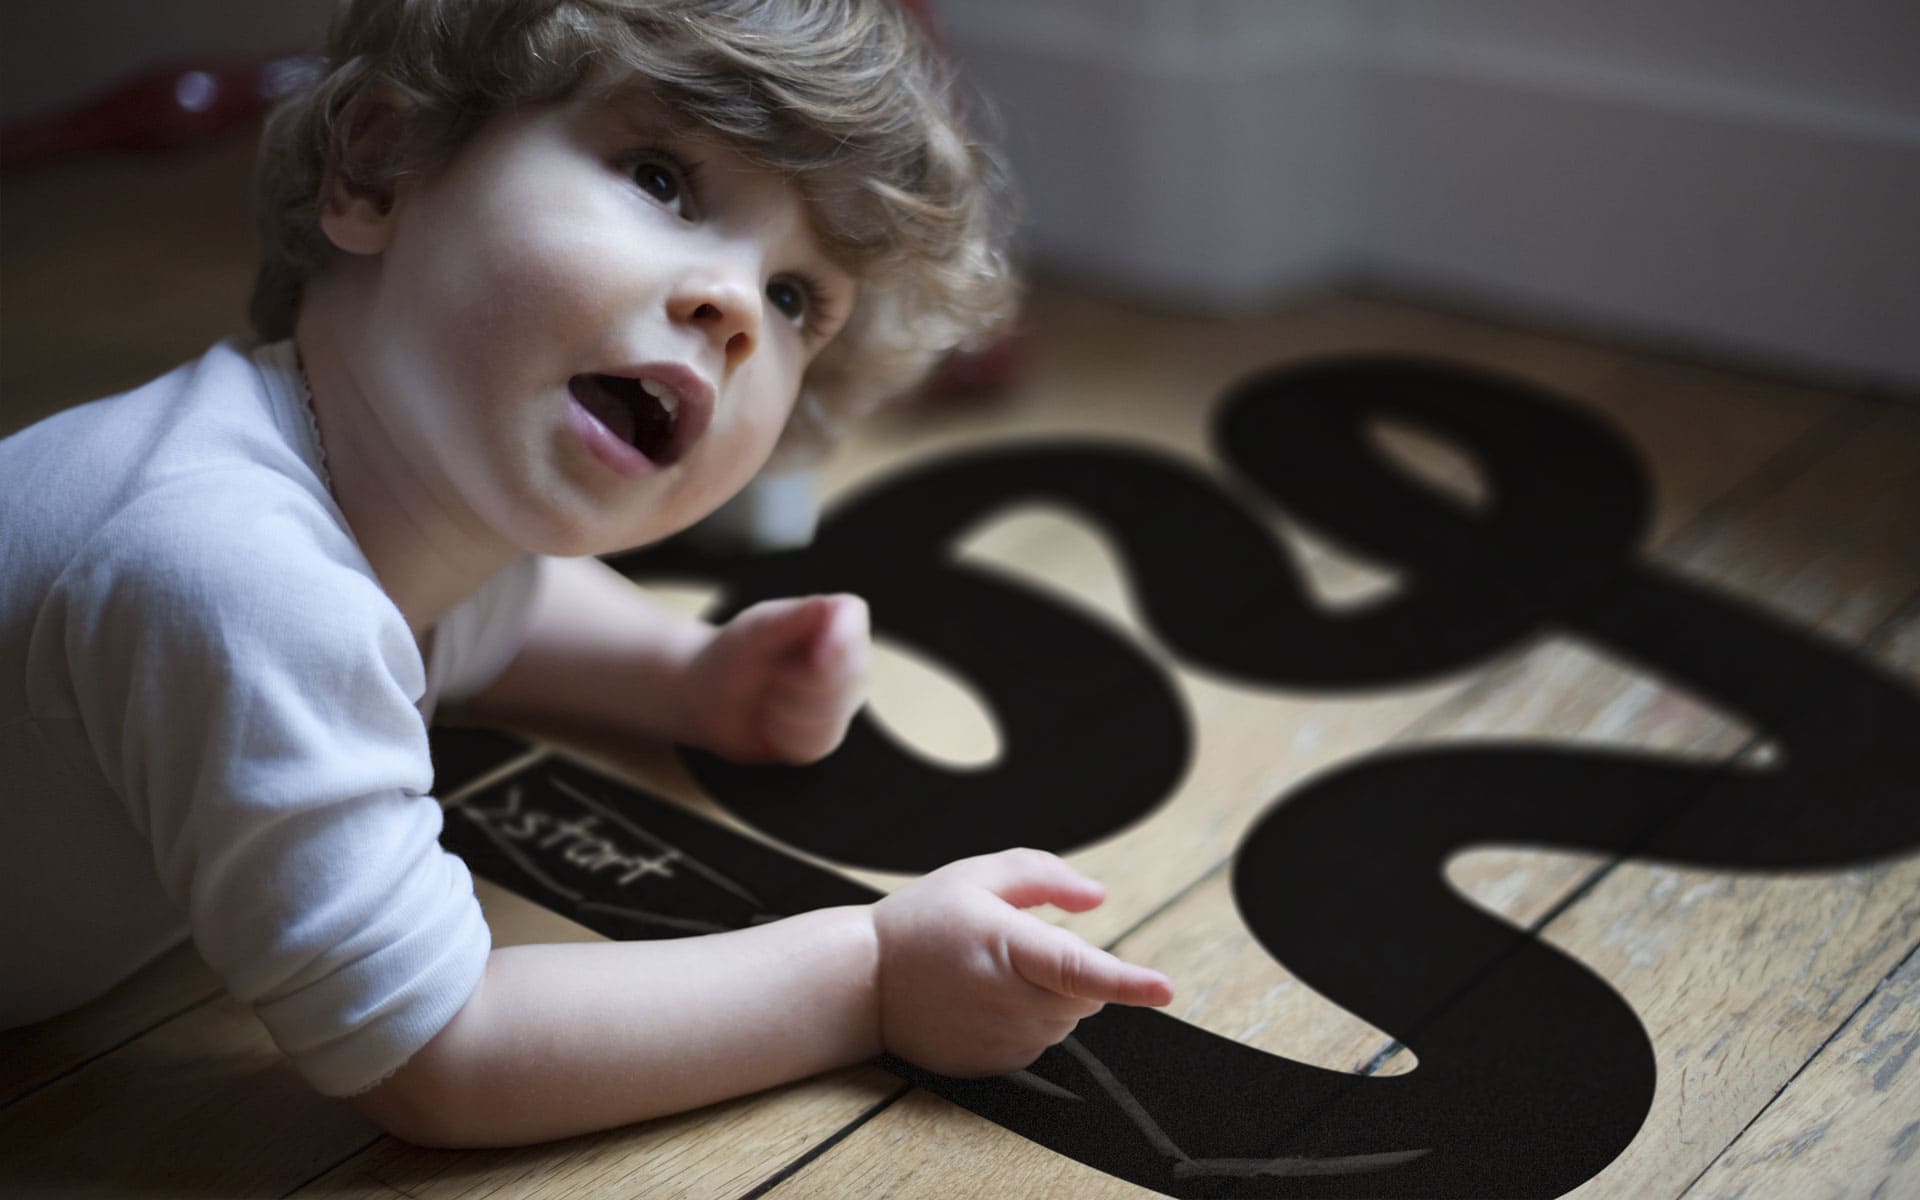 Toys in a vinyl. Simple product design for children